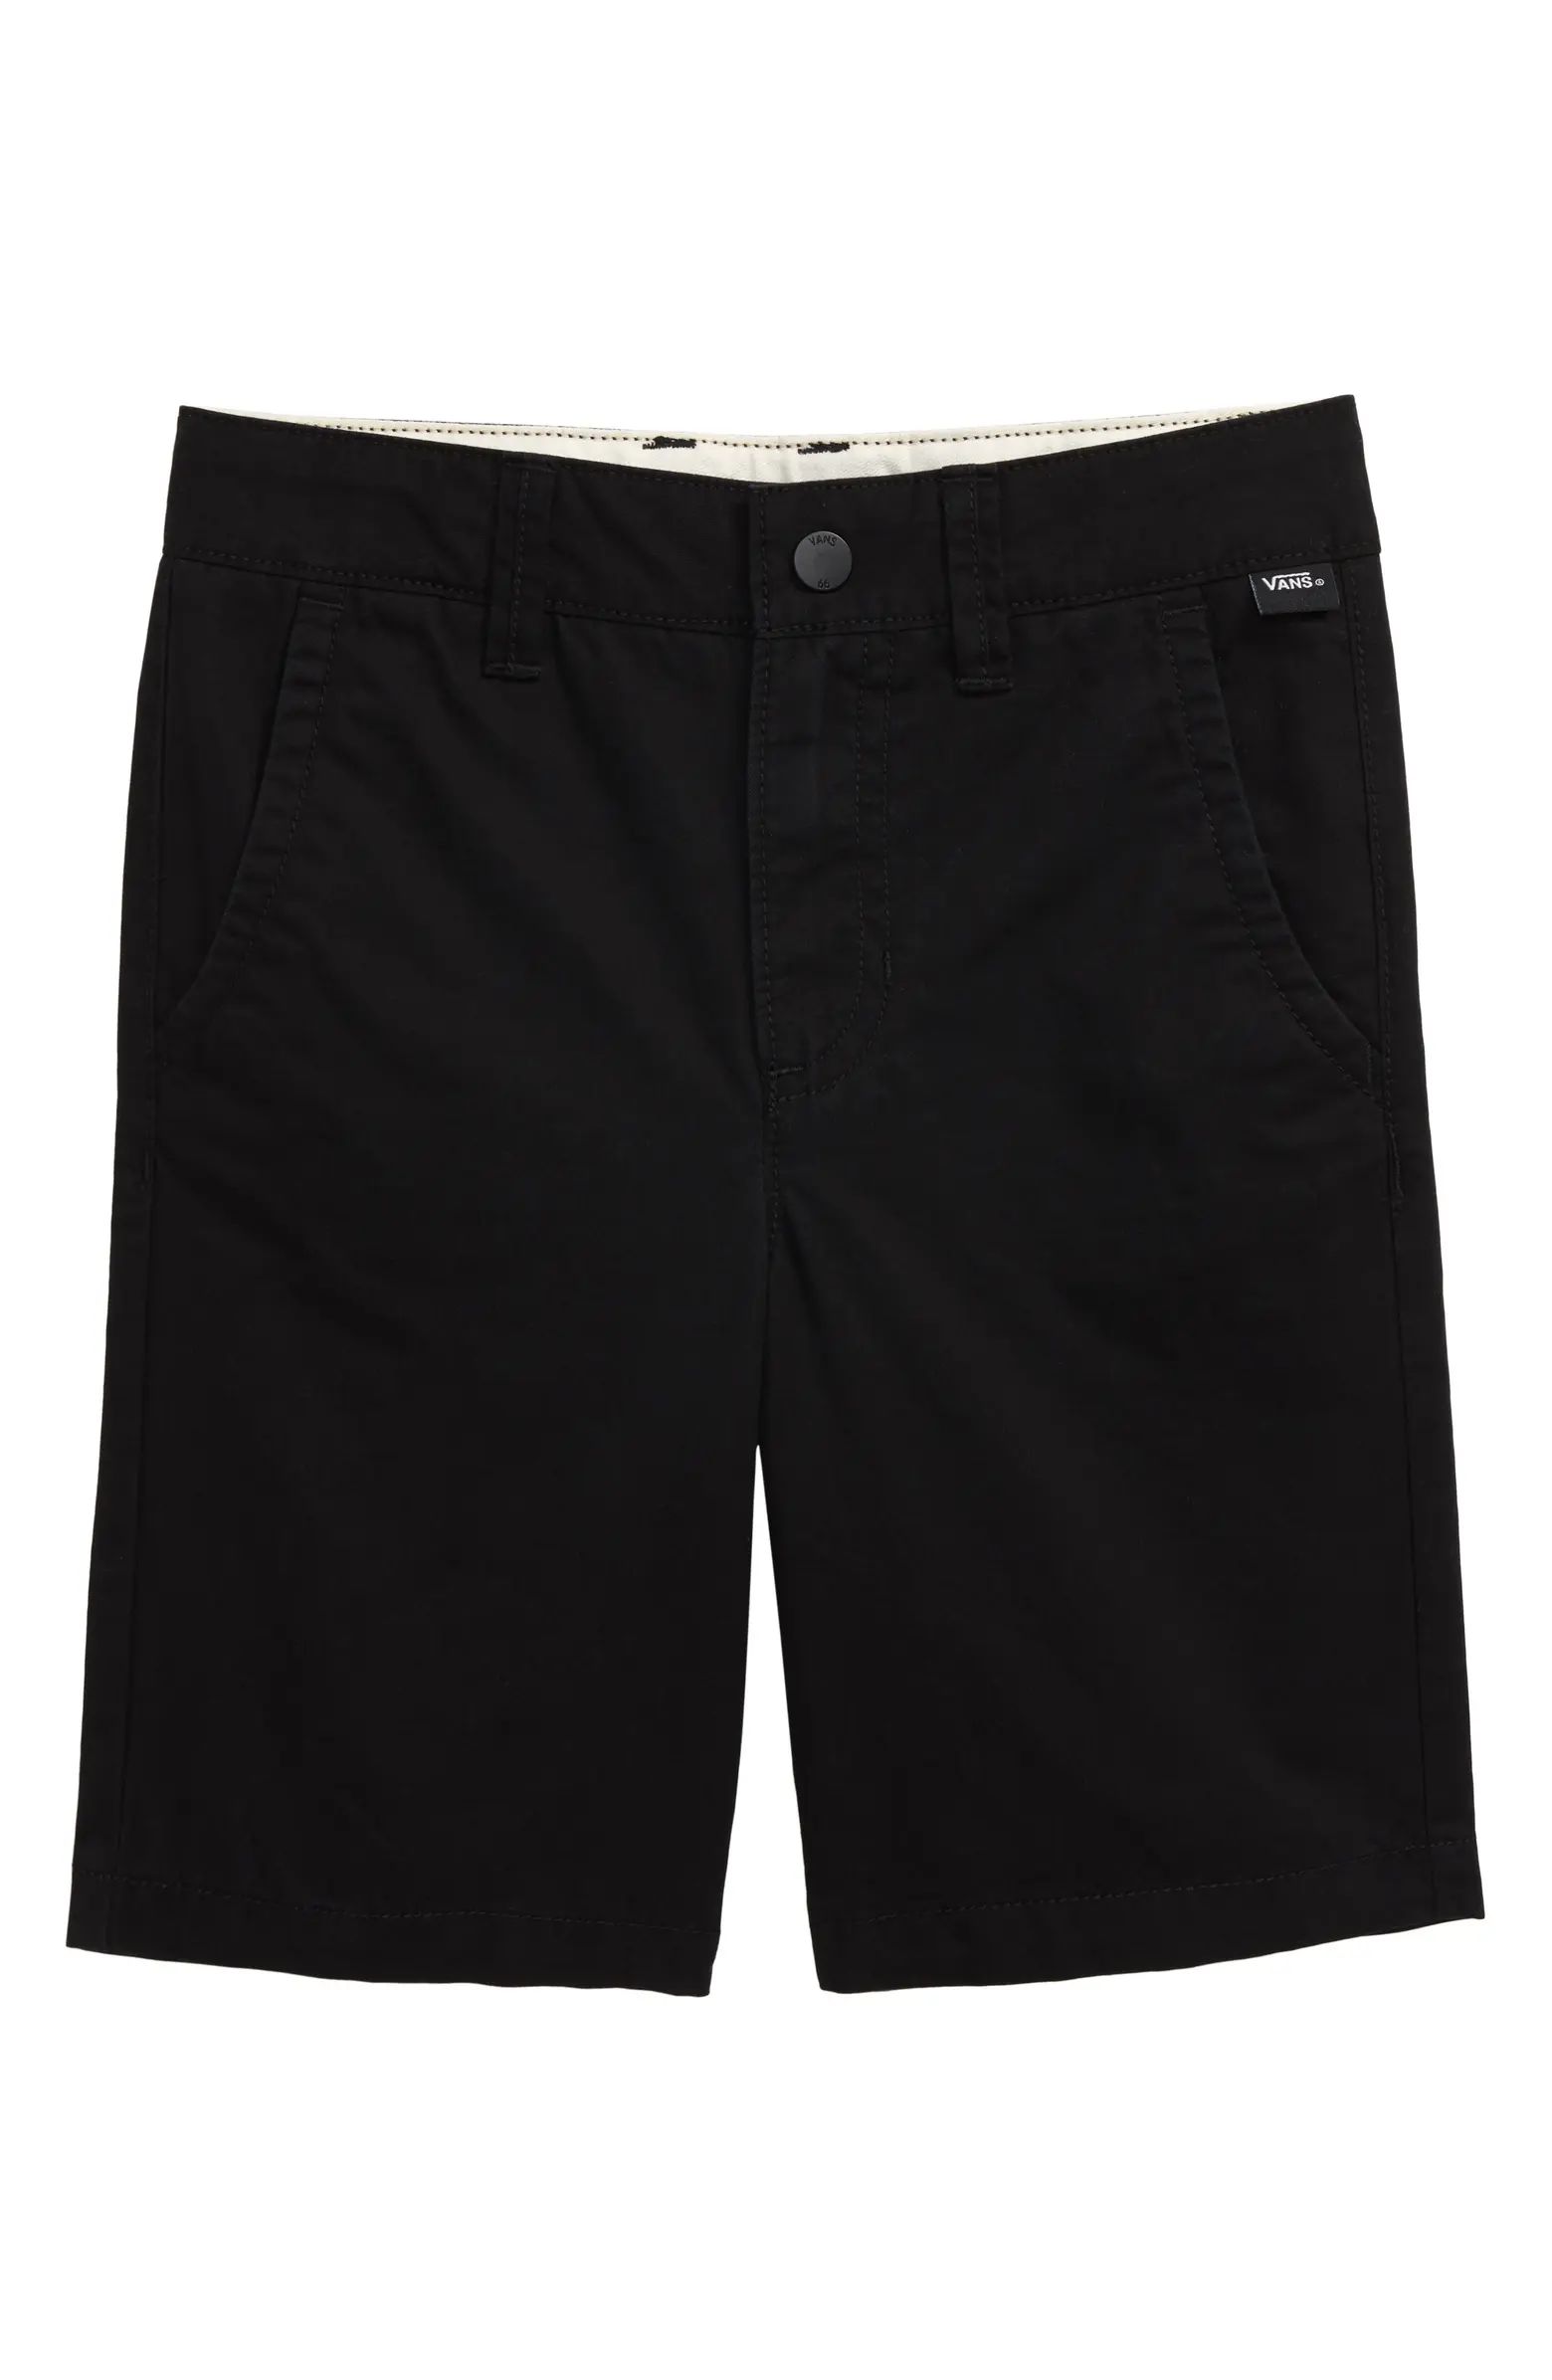 Vans Authentic Chino Shorts | Nordstrom | Nordstrom